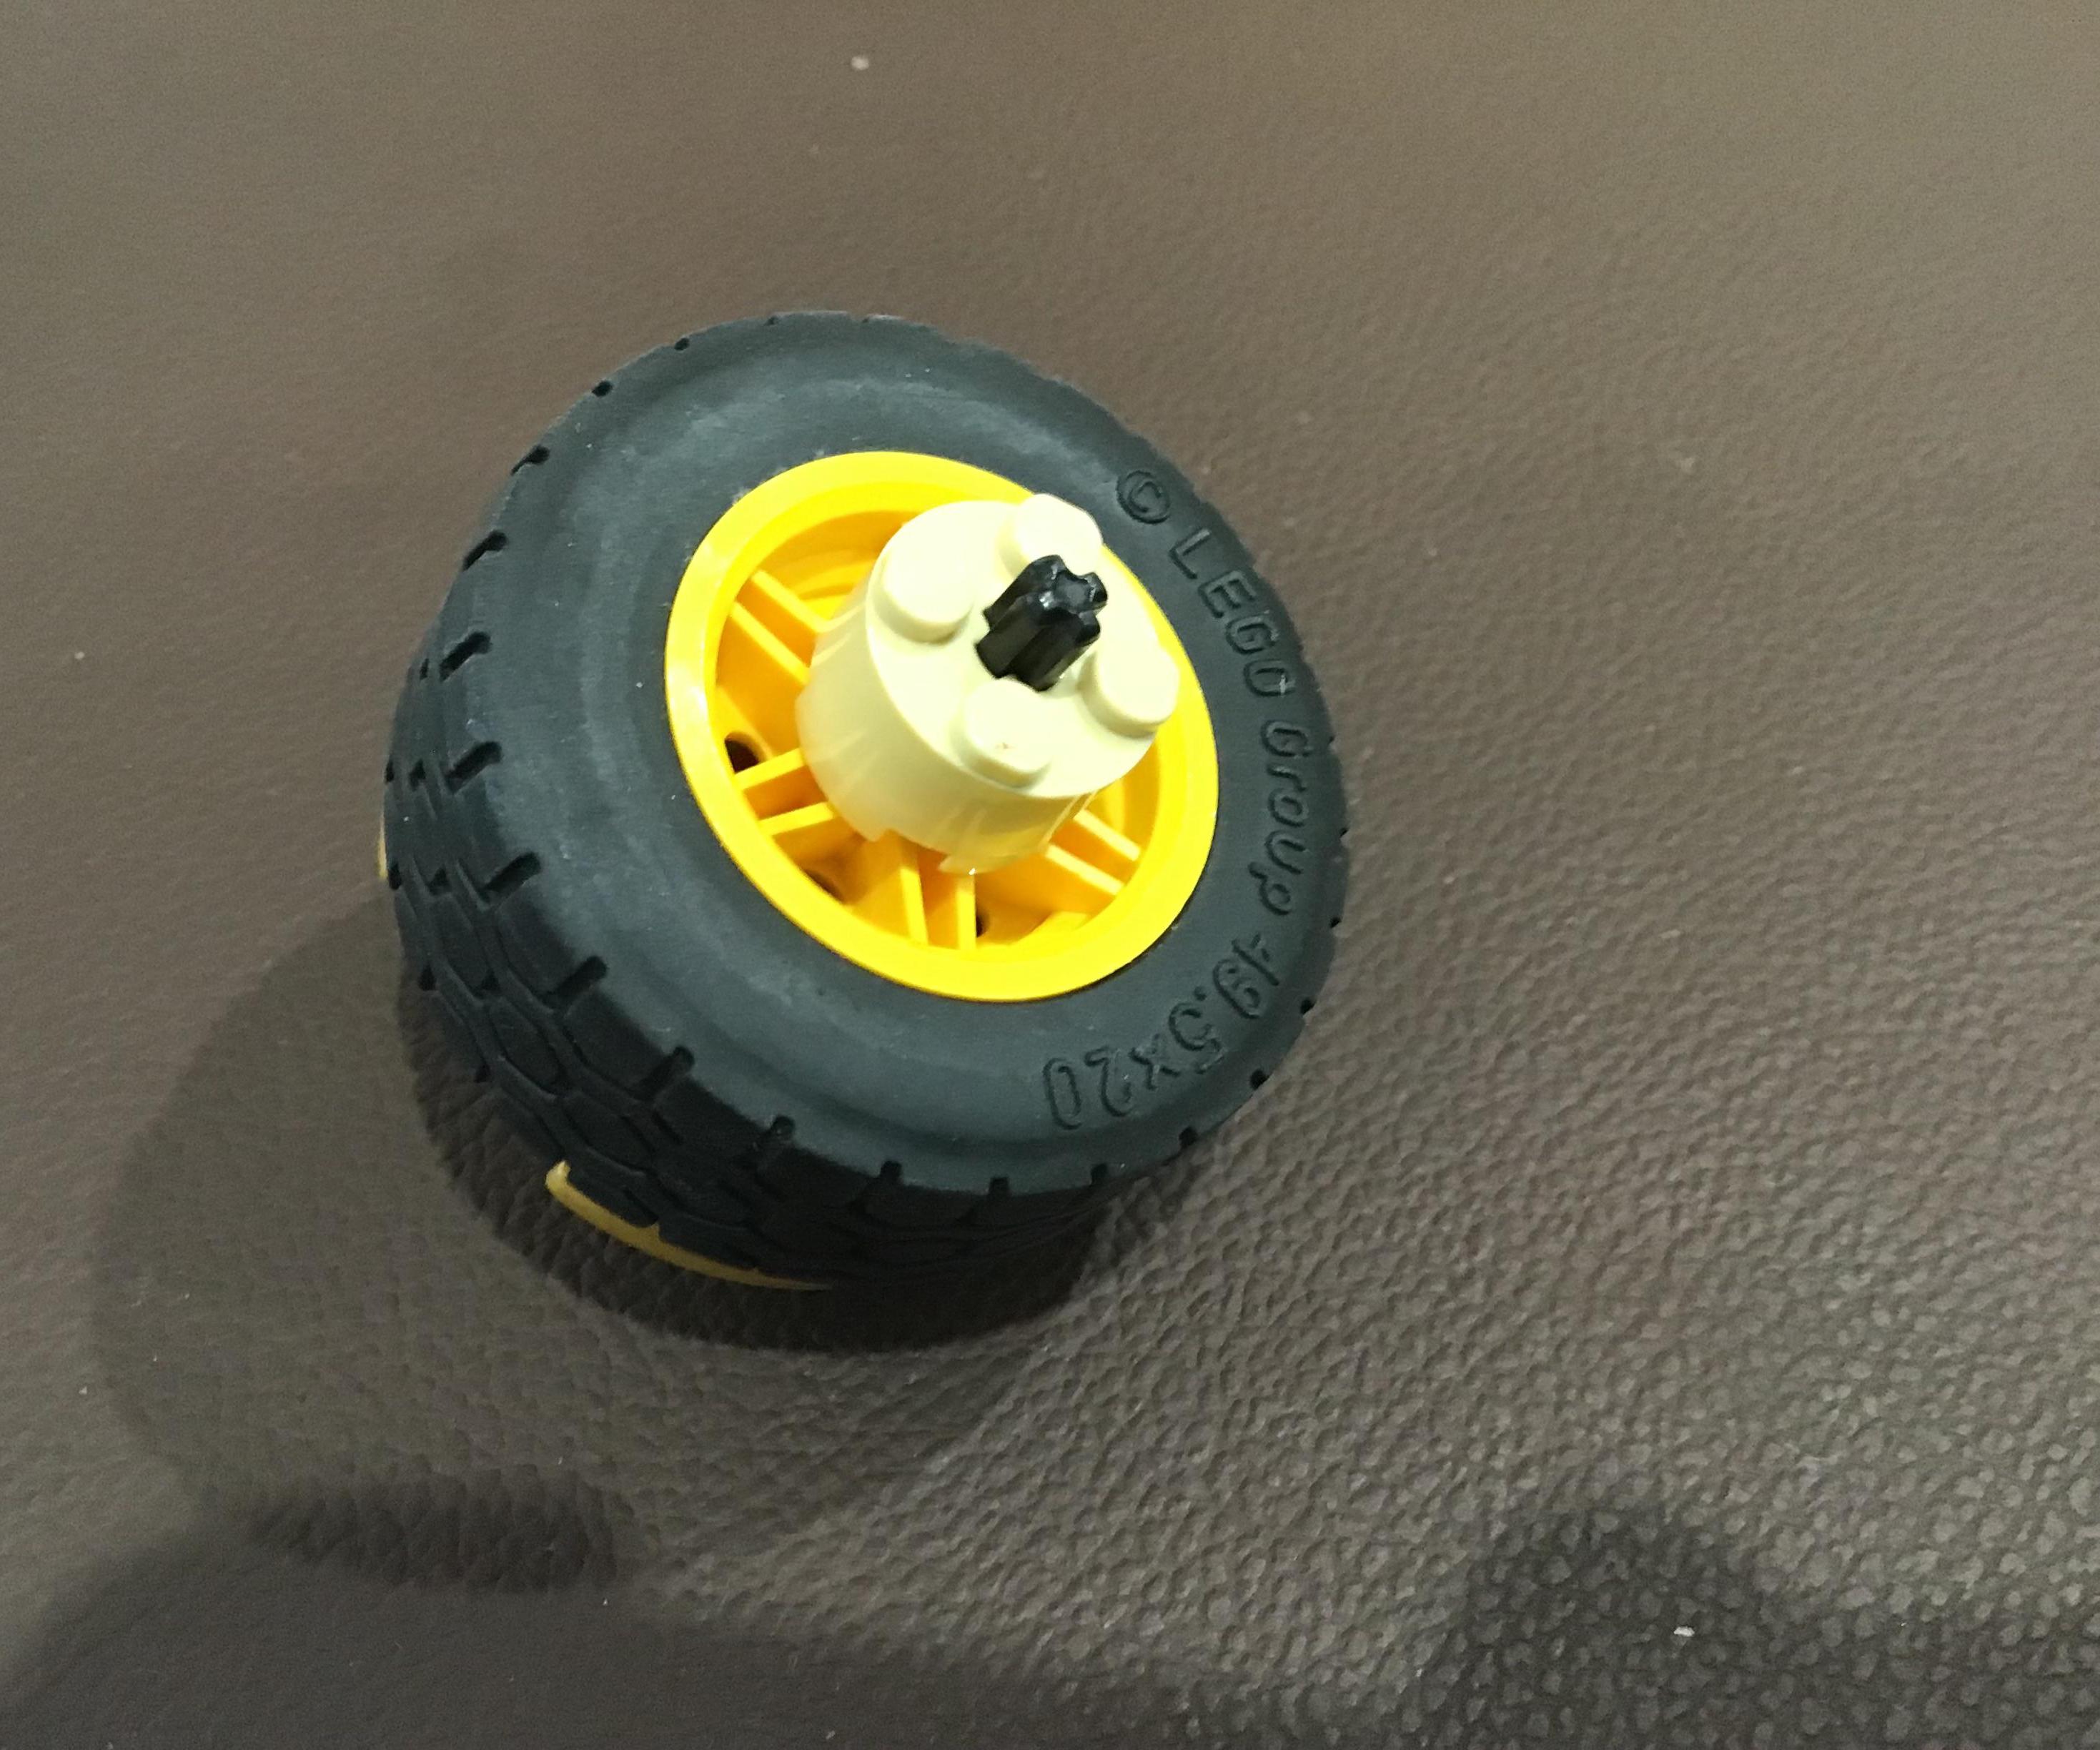 How to Make a Attack Type Beyblade/Top (With Lego!)